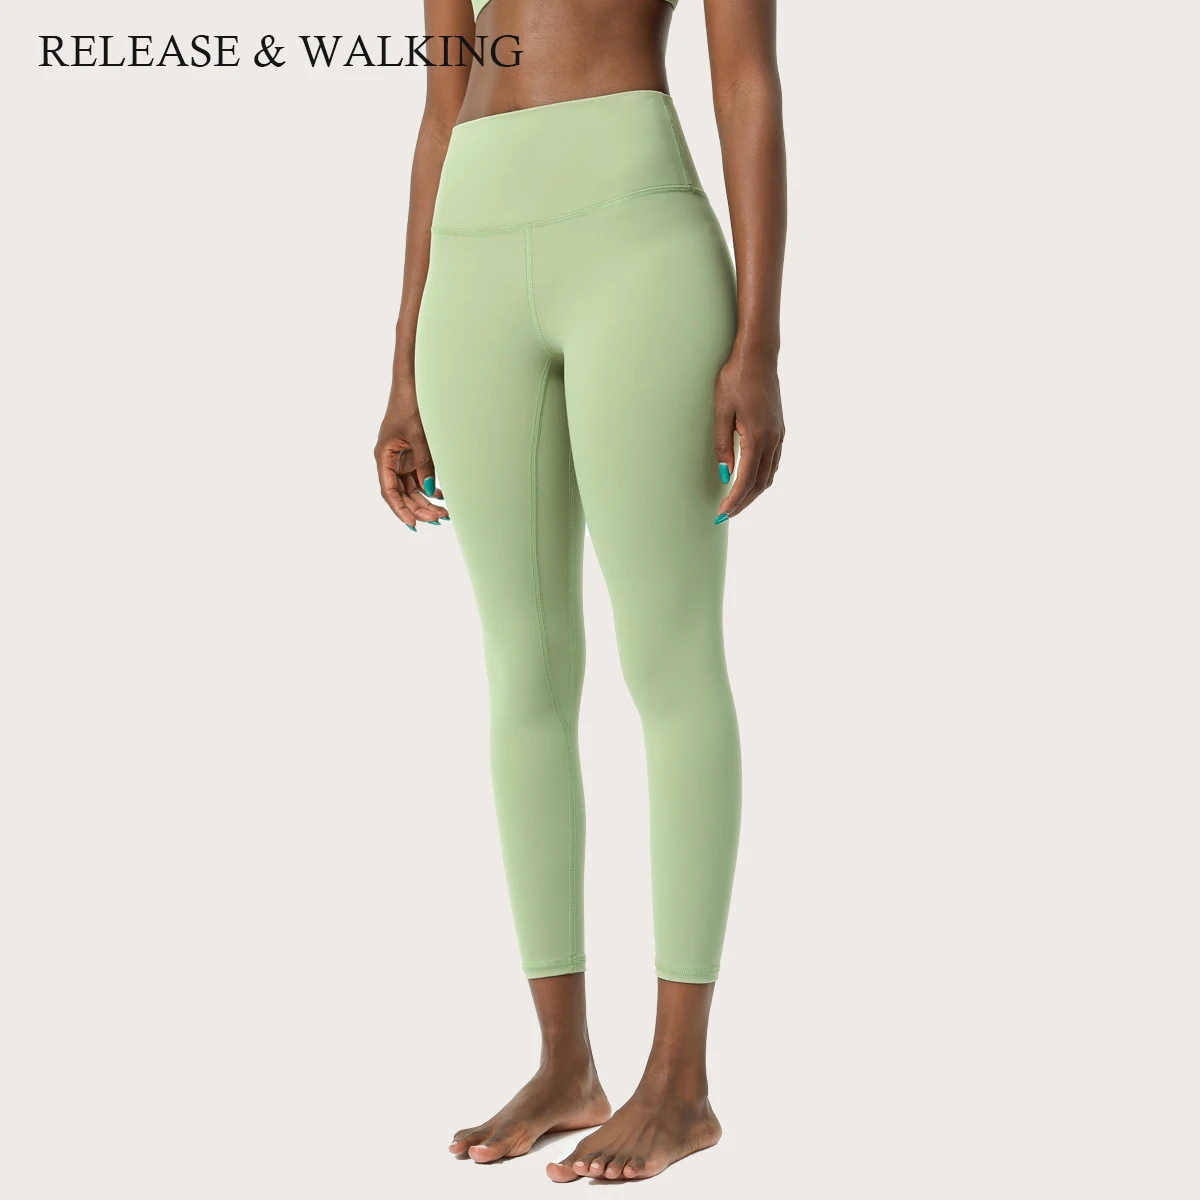 

R&W High Waist Women Macaron Summer Cropped Trousers Sports Yoga Workout Leggings Running Pants Bottoms Joggers Elasticty